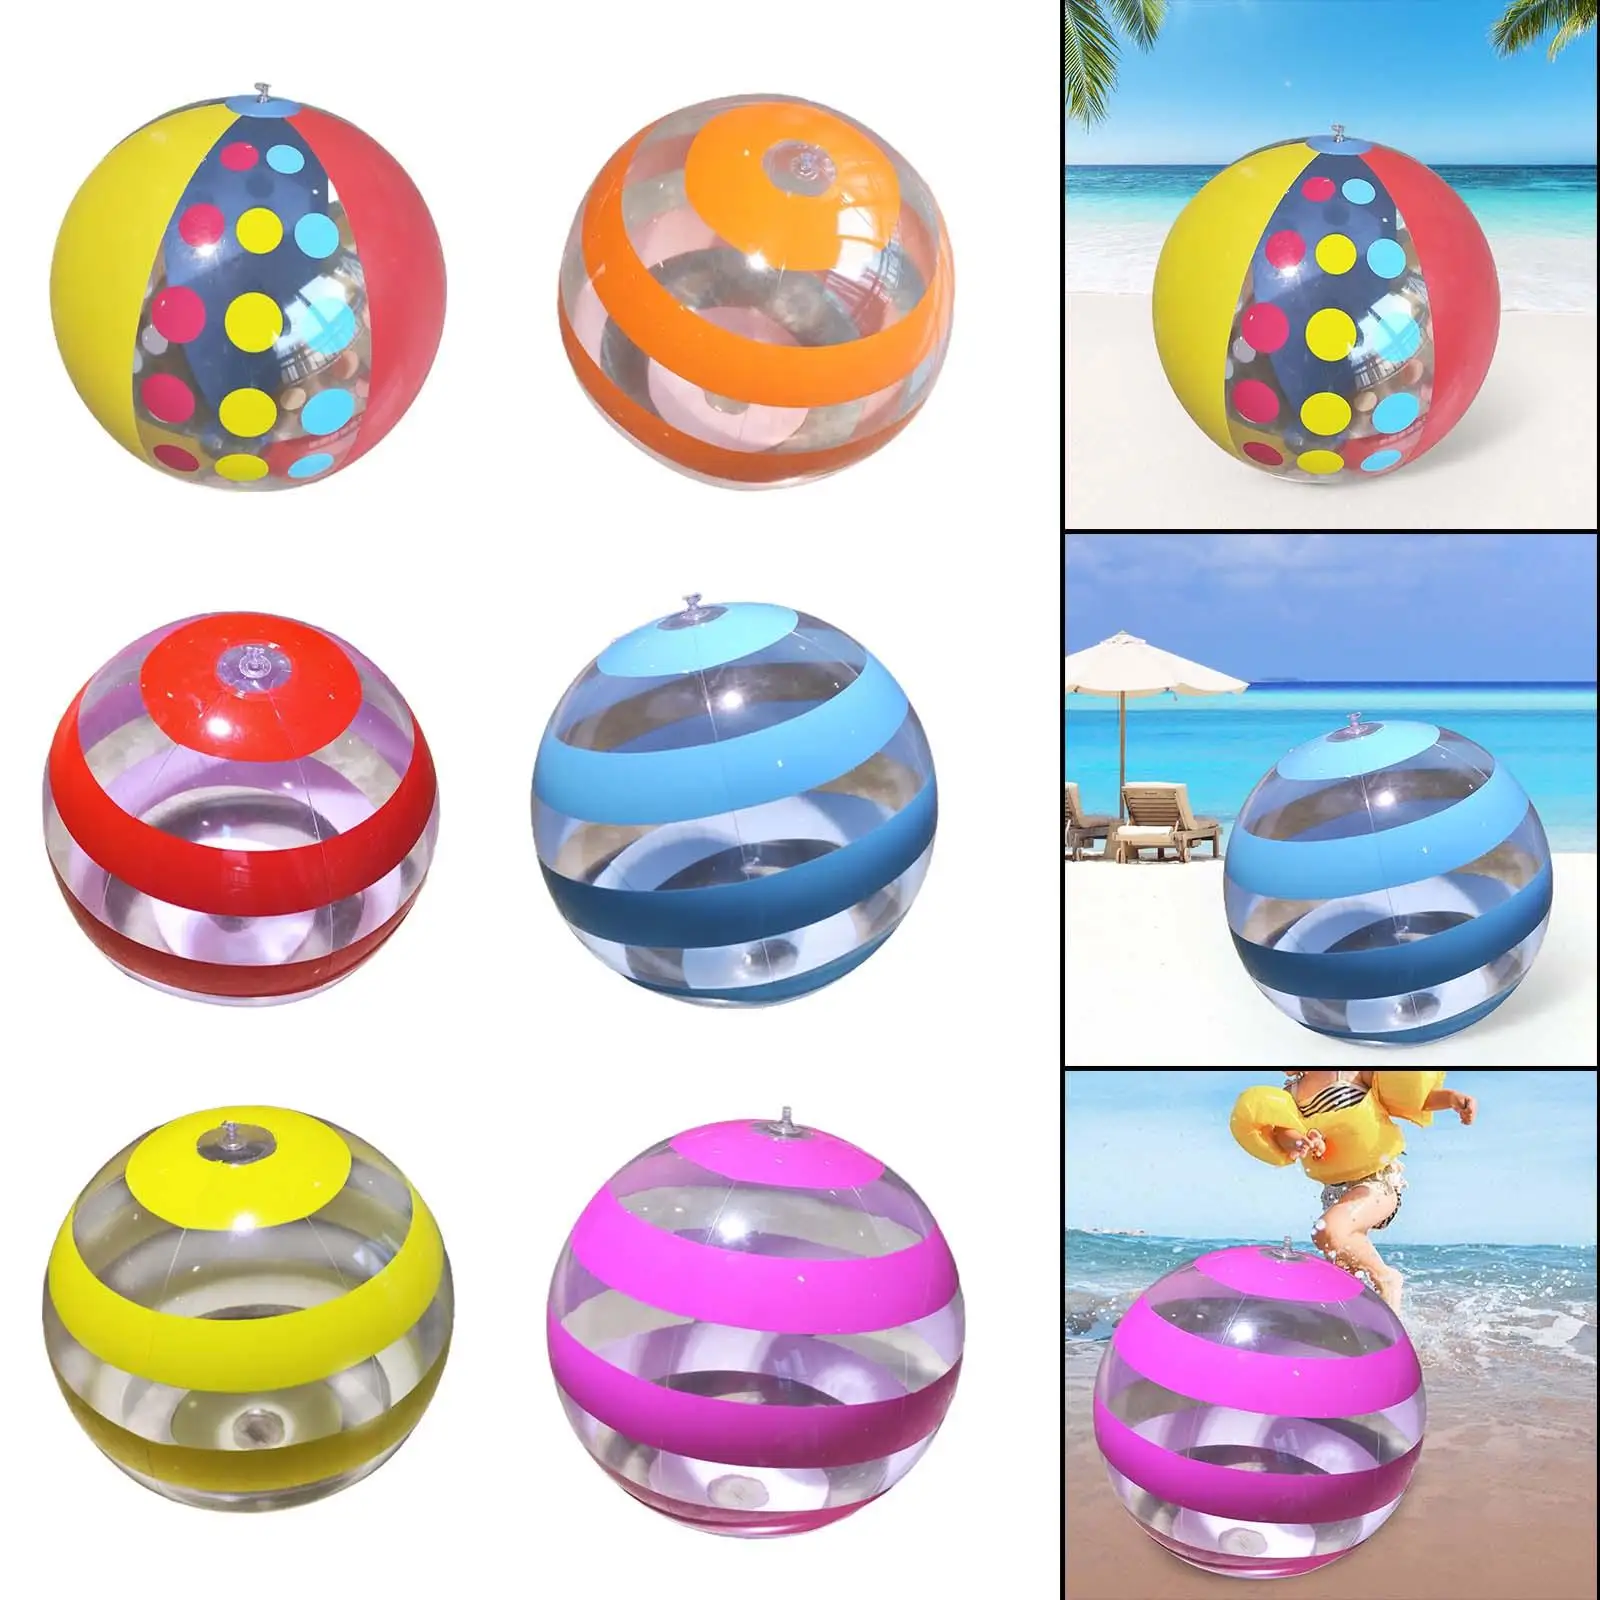 Beach Ball 15.75`` Party Favor Leakproof Pool Water Games Toys Summer Water Games for Hawaiian Theme Party Pool Yard Lake